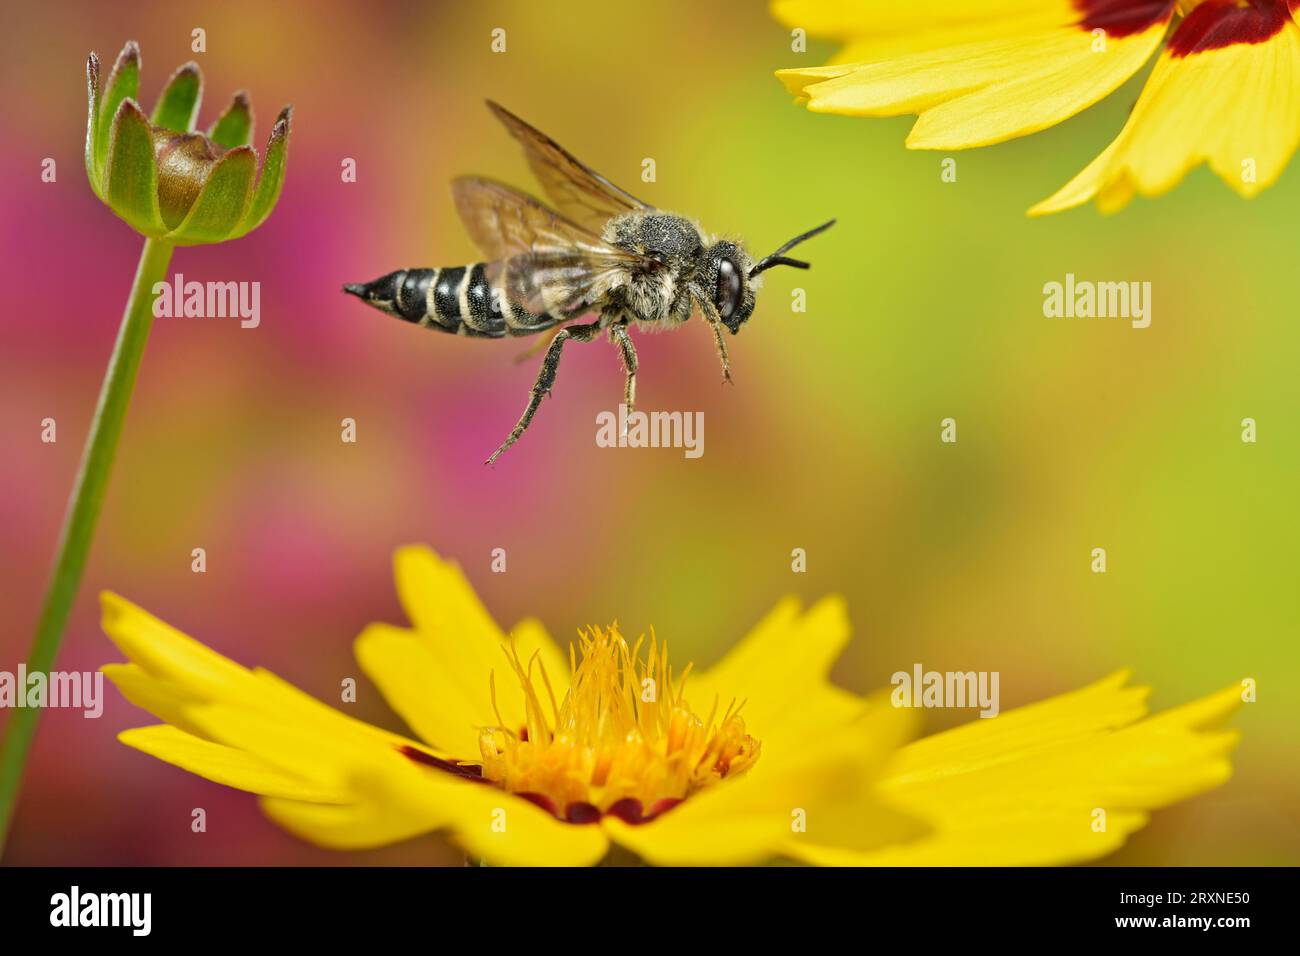 Unarmoured leaf-cutting cuckoo bee (Coelioxys inermis) in flight at the flower of the girl's eye (Coreopsis lanceolata) Stock Photo